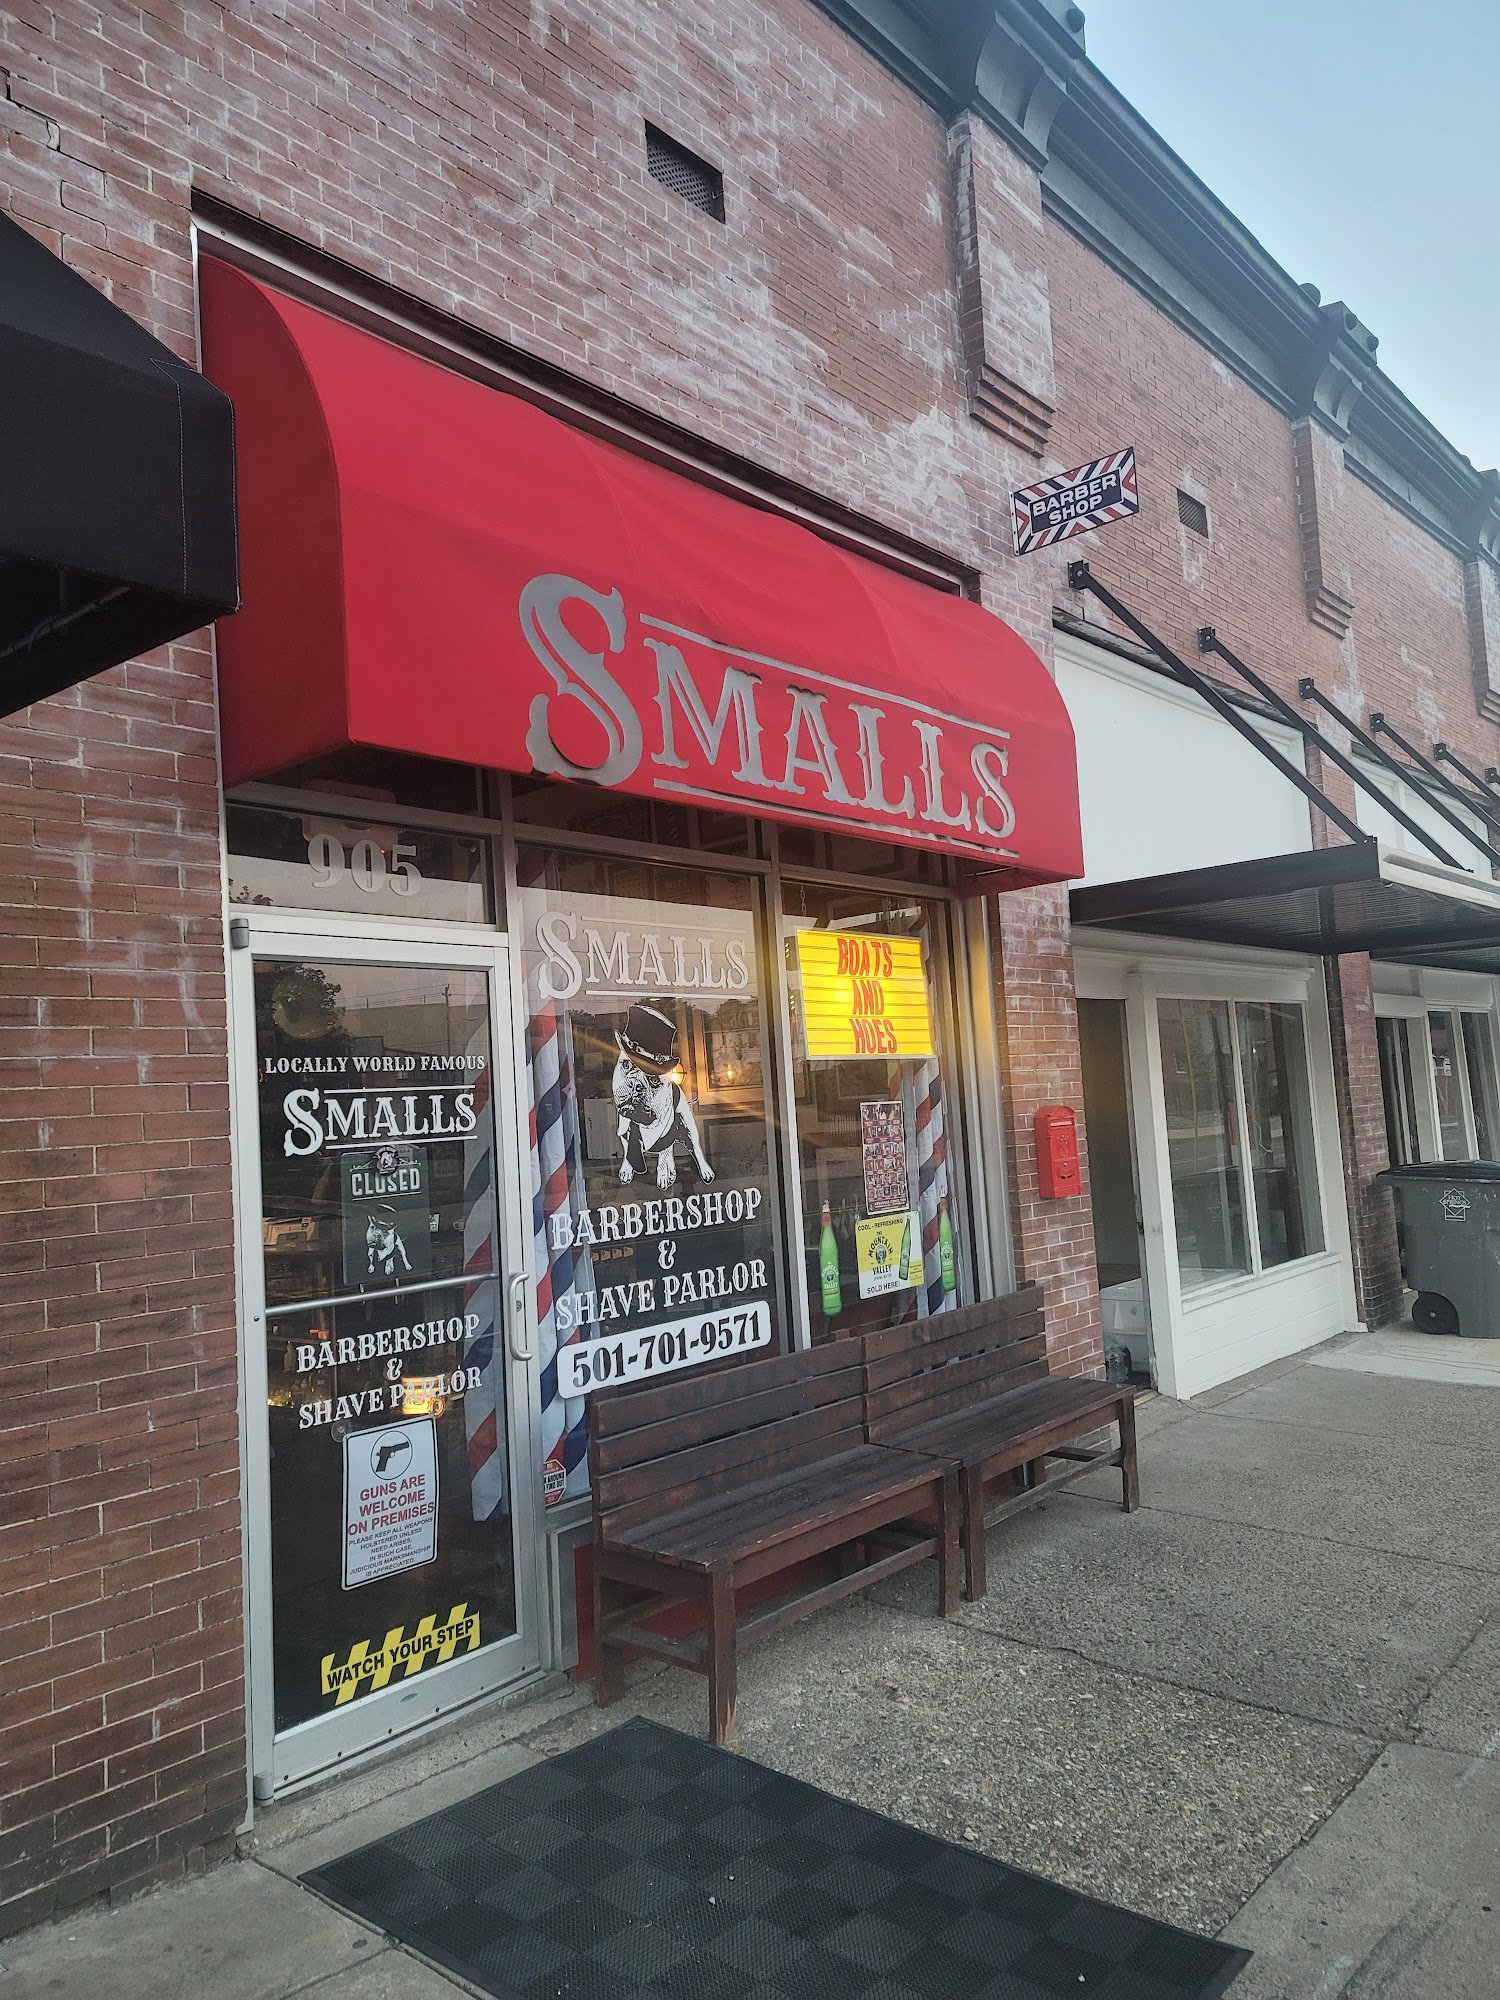 SMALL'S BARBER SHOP & SHAVE PARLOR